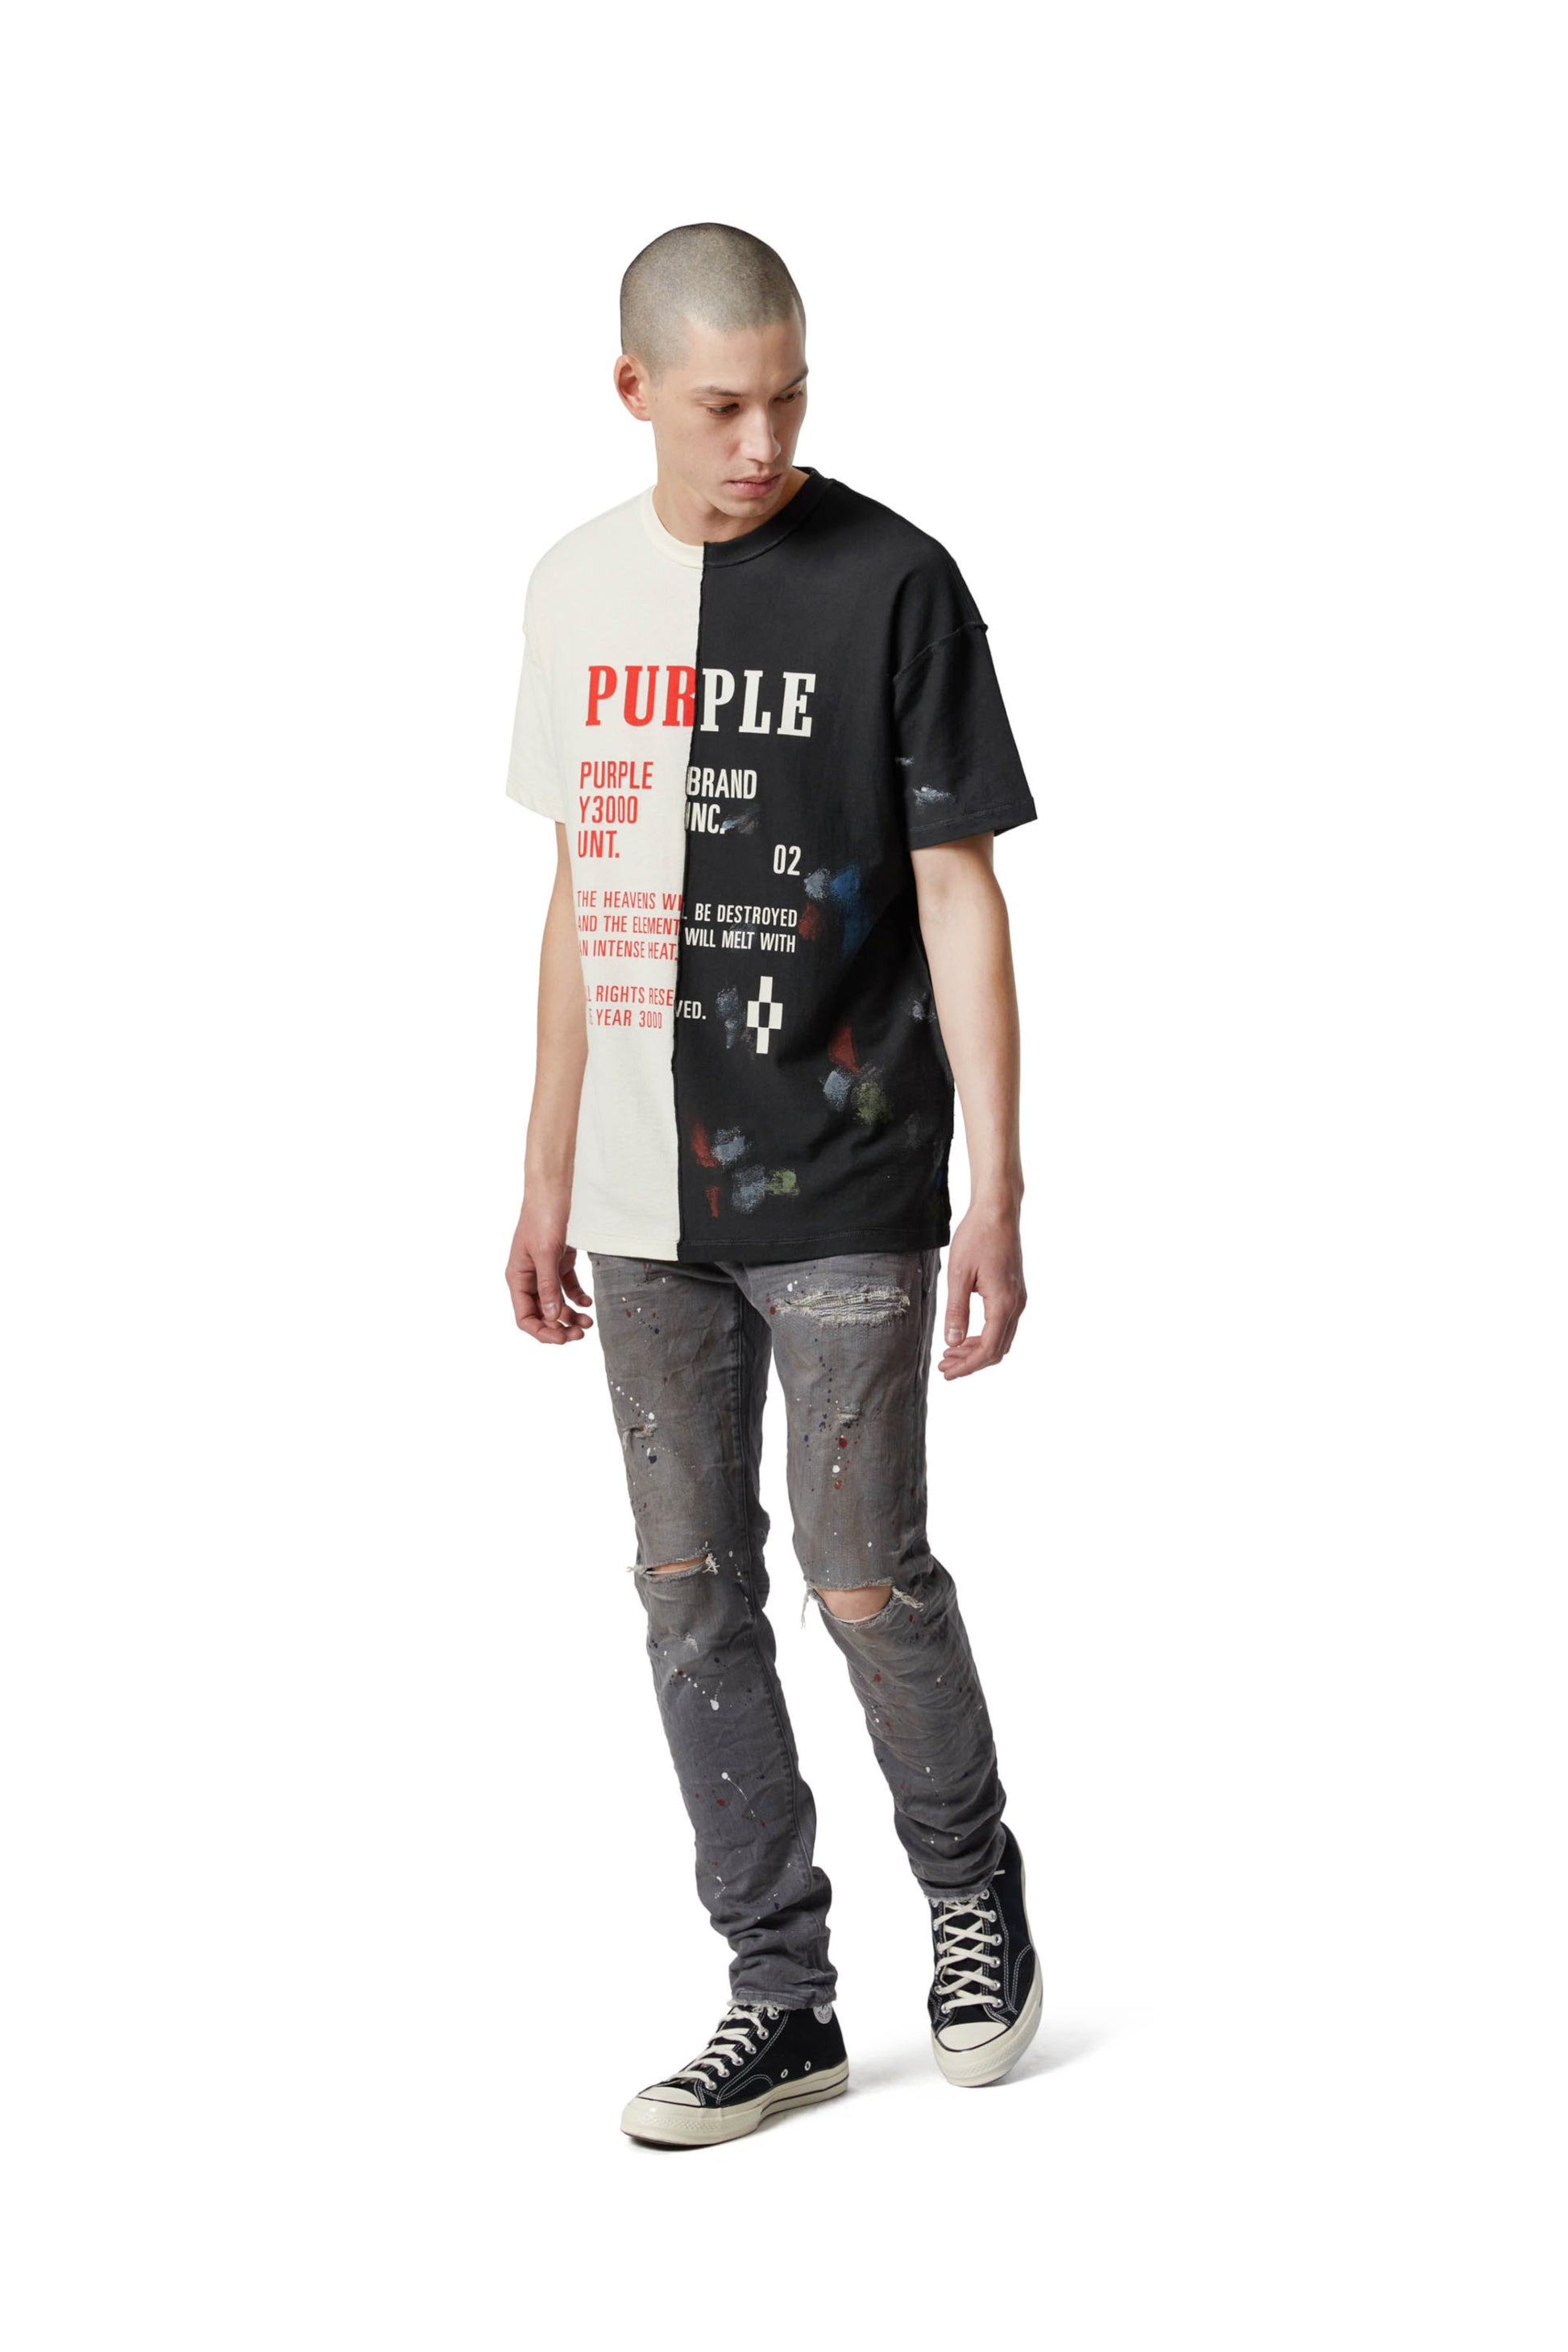 PURPLE BRAND - Men's Relaxed Fit T-Shirt - Style No. P101 - Right Ecru Intense Heat  - Model Styled Pose